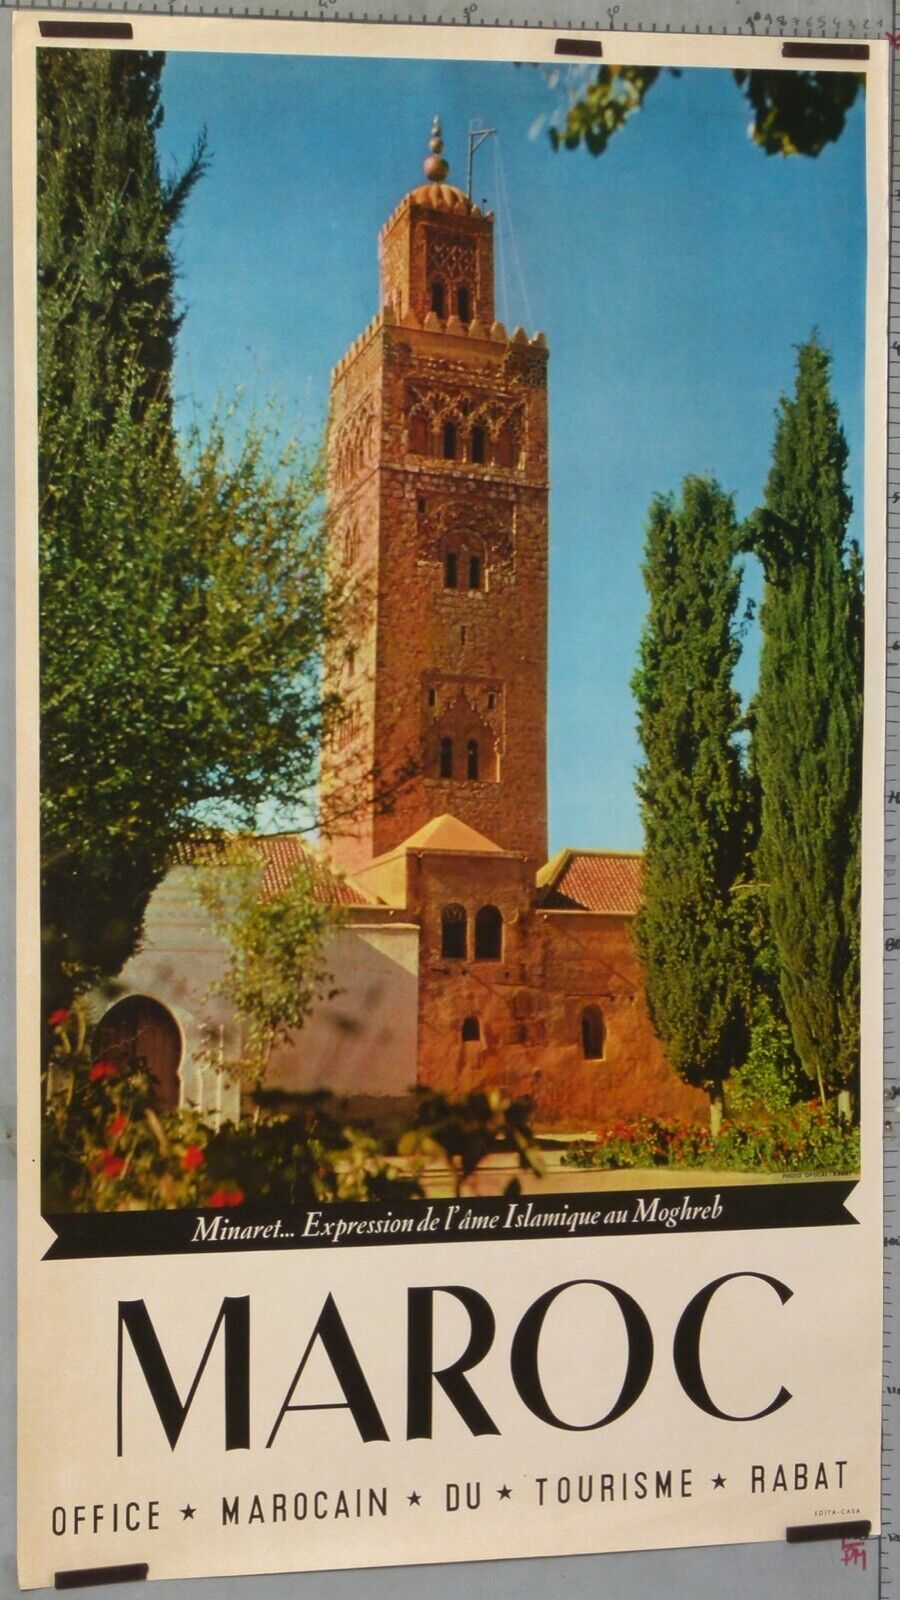 ANTIQUE MOROCCO MINARET POSTER EXPRESSION OF THE ISLAMIC SOUL OF THE MAGHREB c 1950 